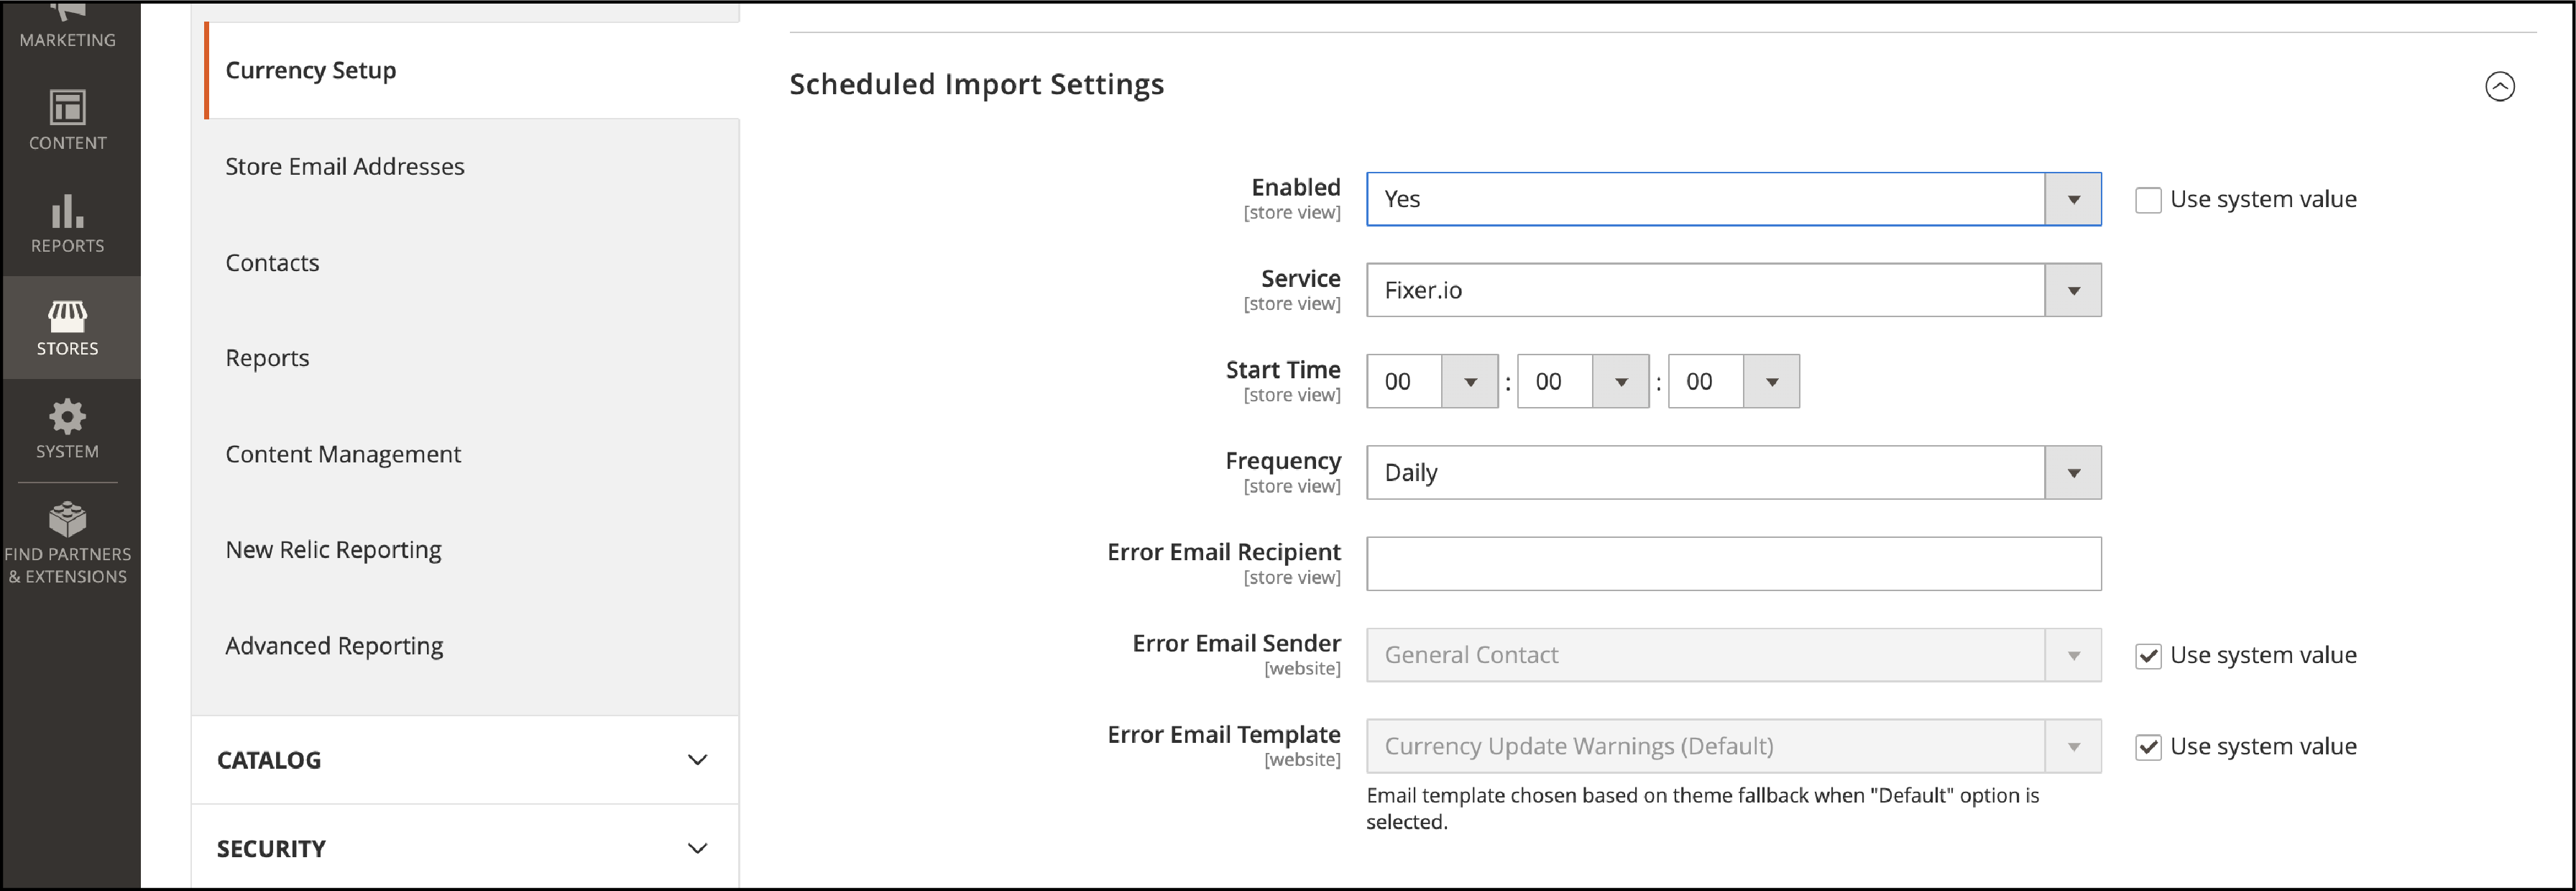 Set Up the Scheduled Import Settings- Magento 2 currency